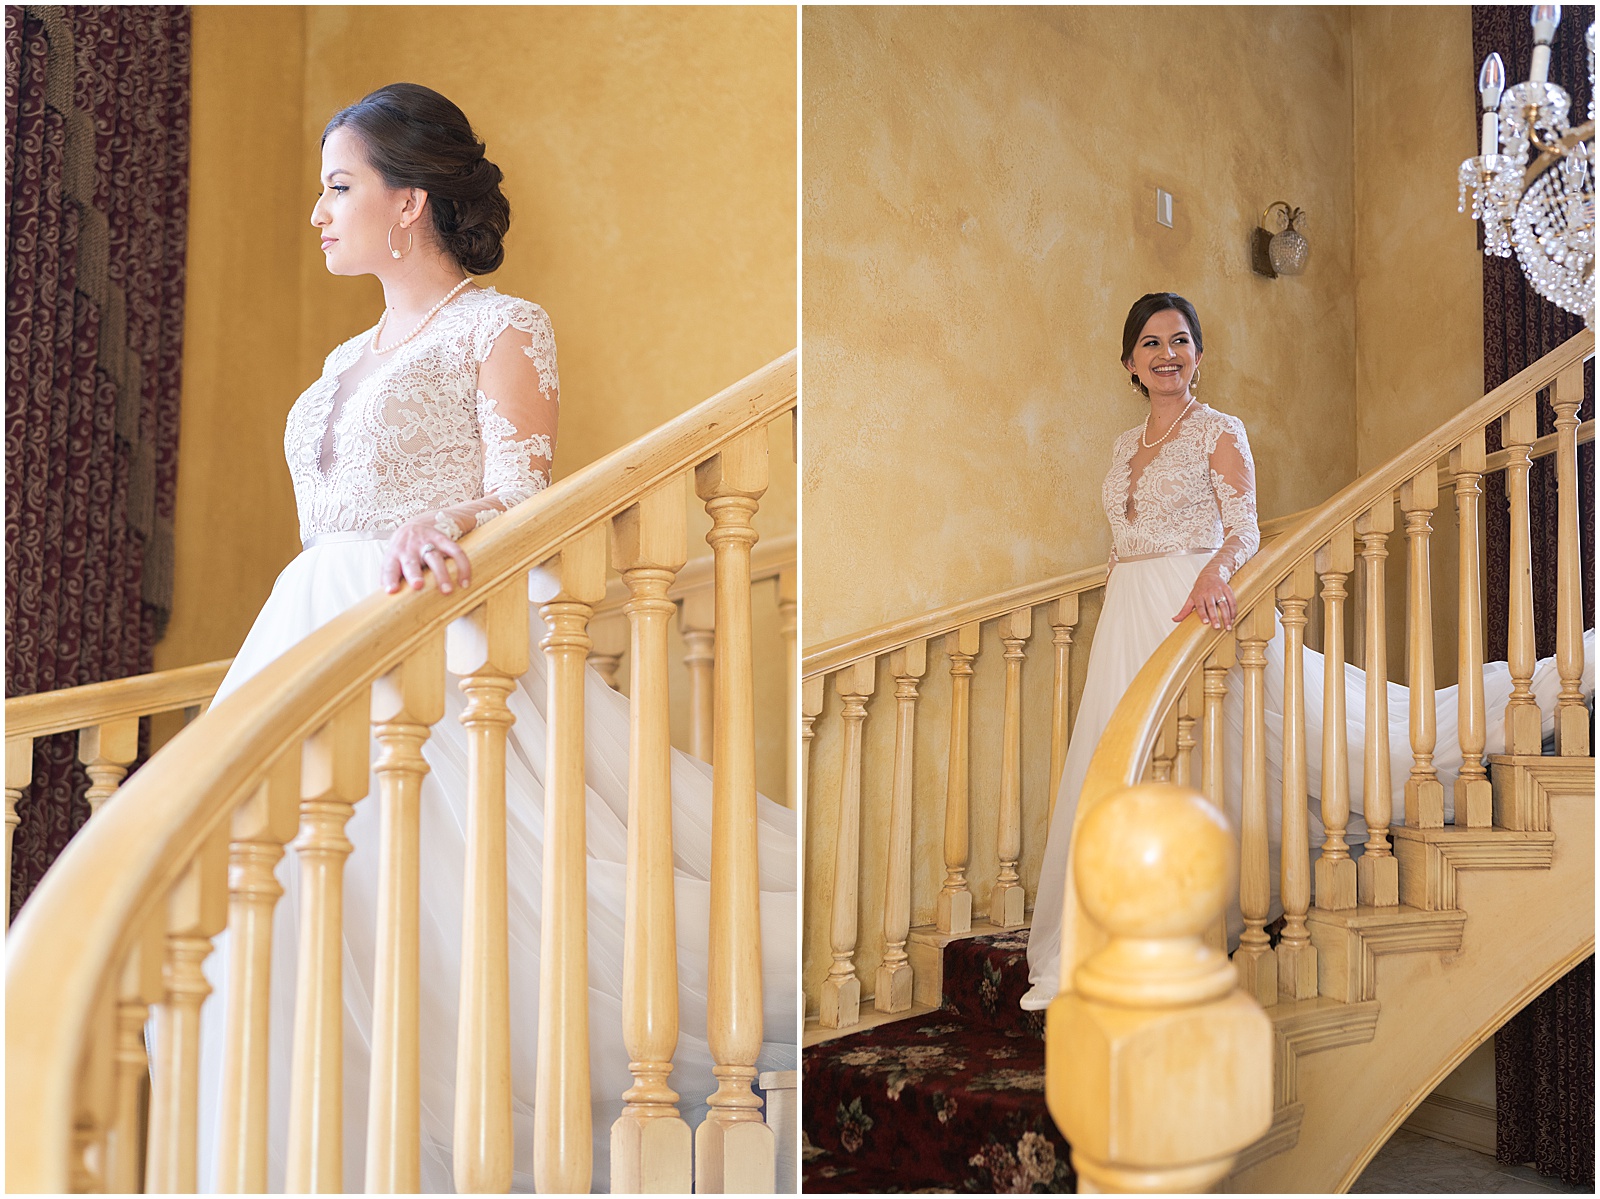 Getting ready and detail photos at Ashelynn Manor | Swish and Click Photography